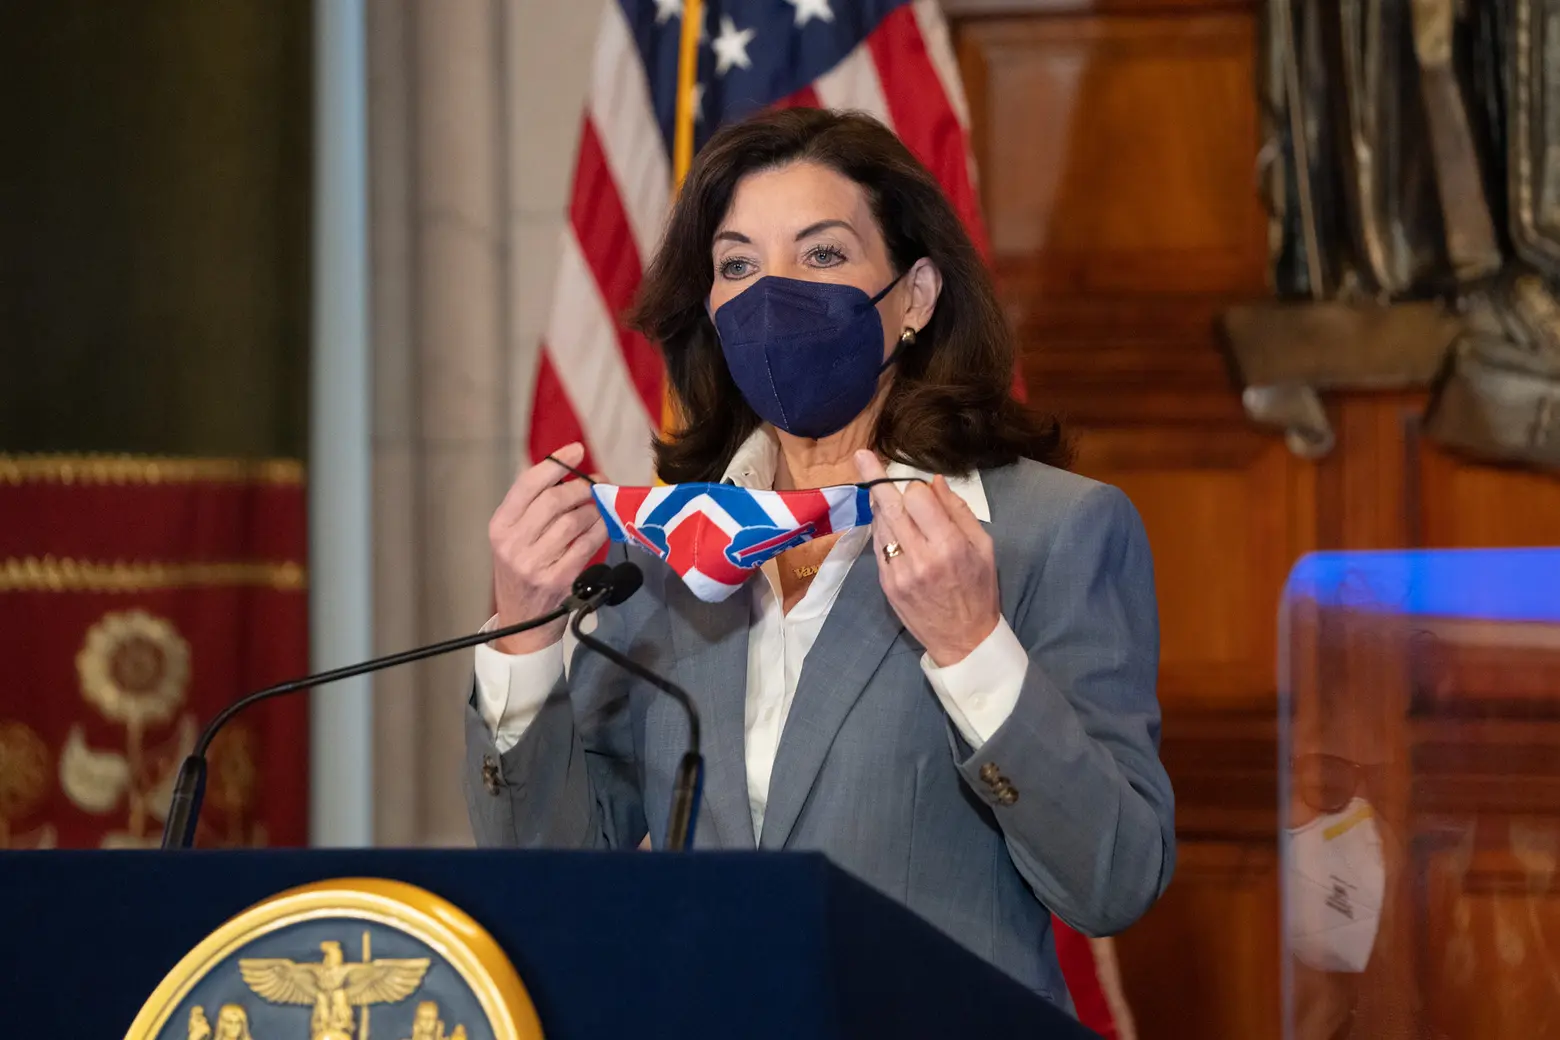 Hochul lifts New York’s indoor mask mandate